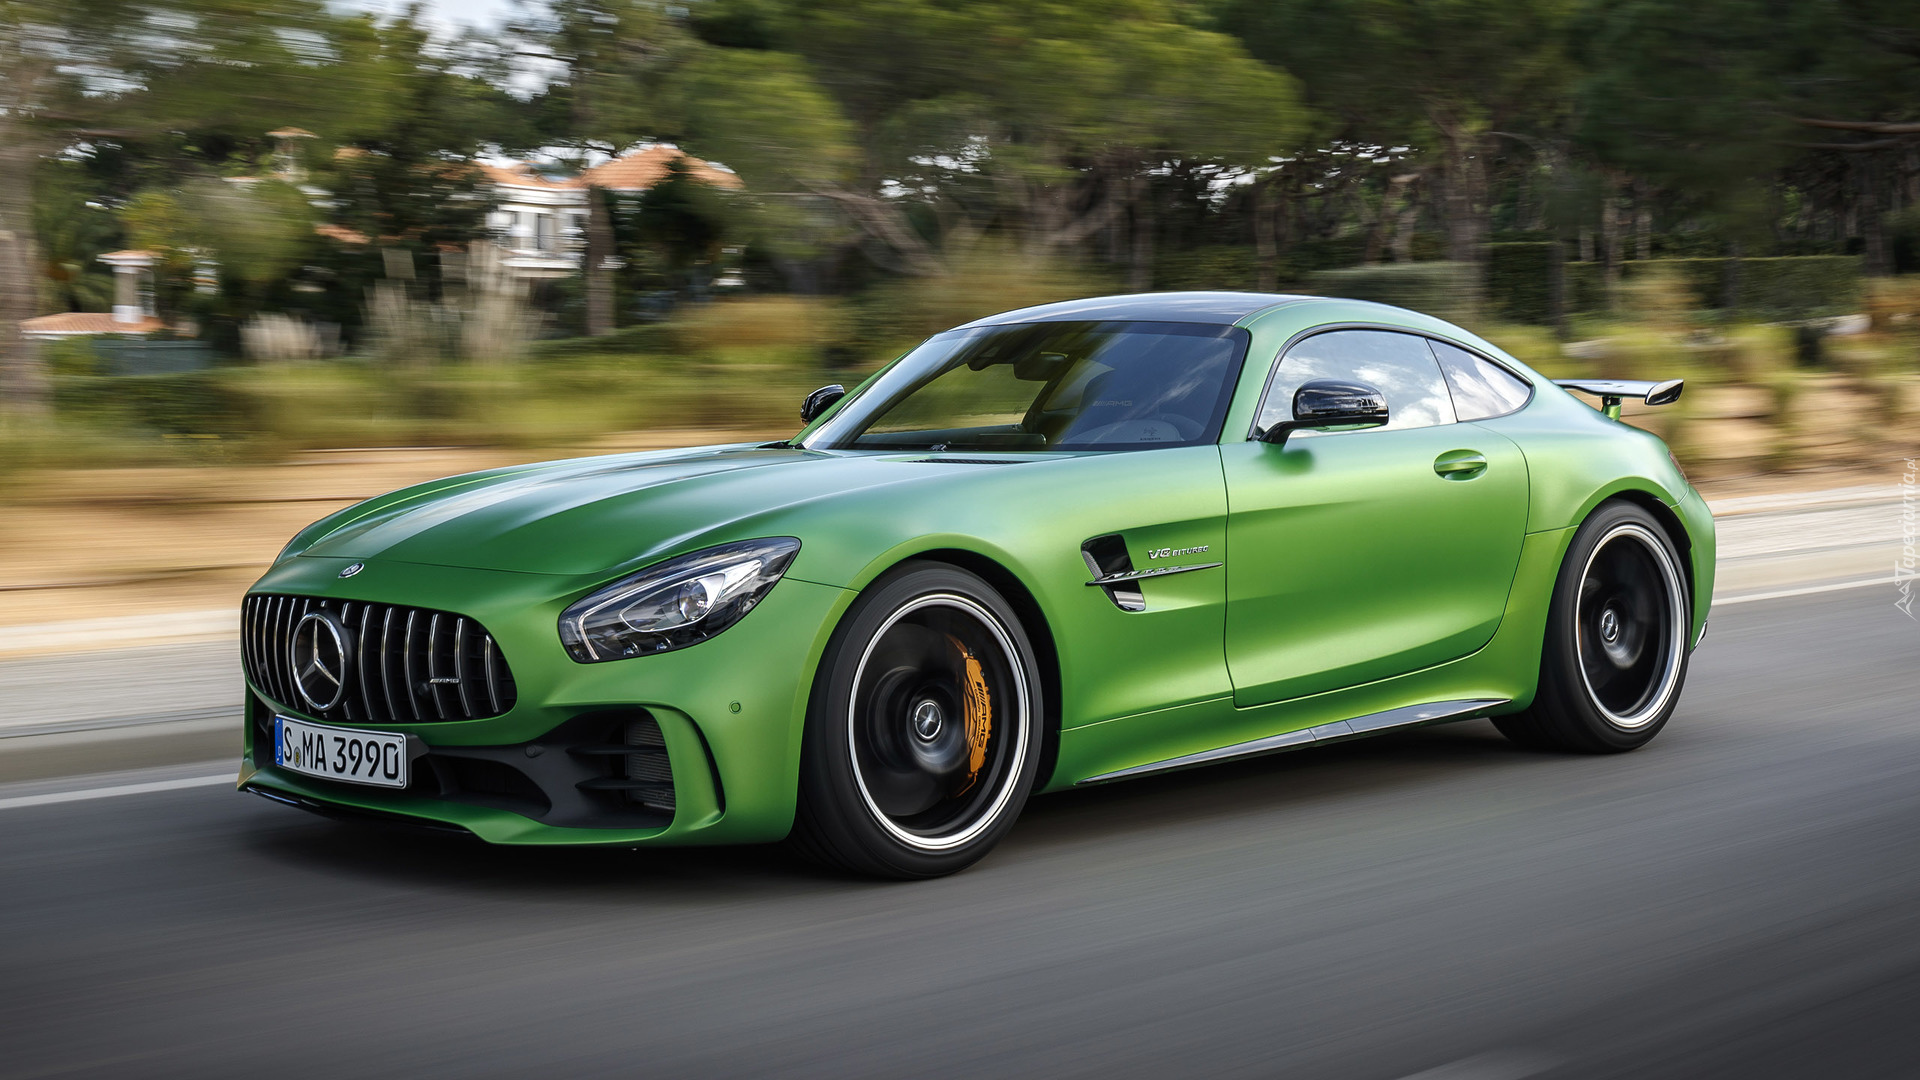 Zielony, Mercedes-AMG GT R, Coupe